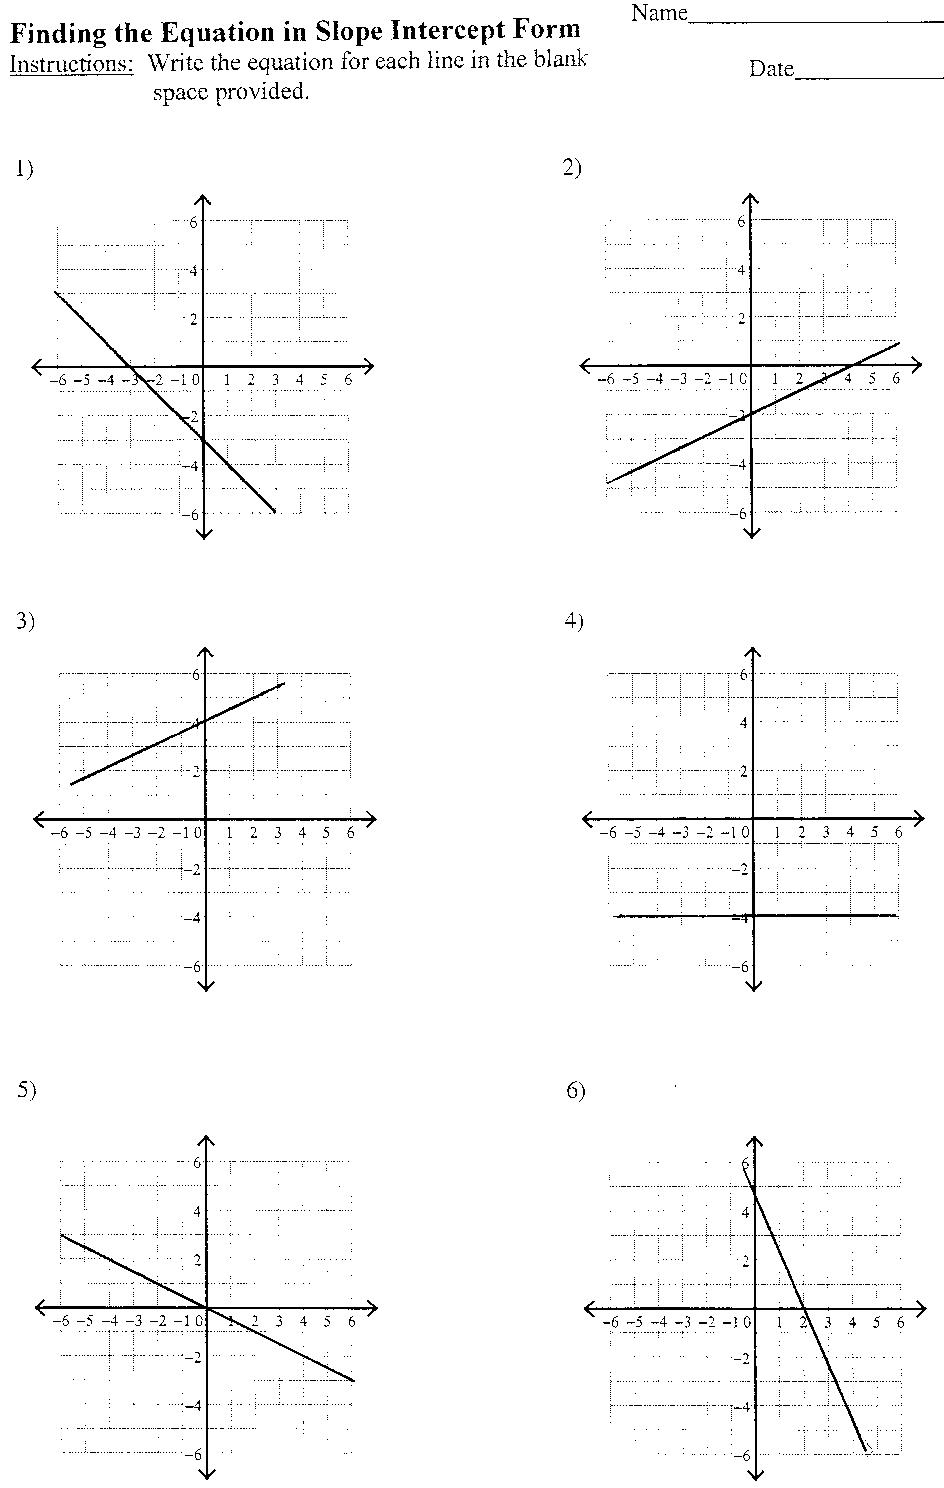 Top 10 Punto Medio Noticias  Writing Linear Equations From